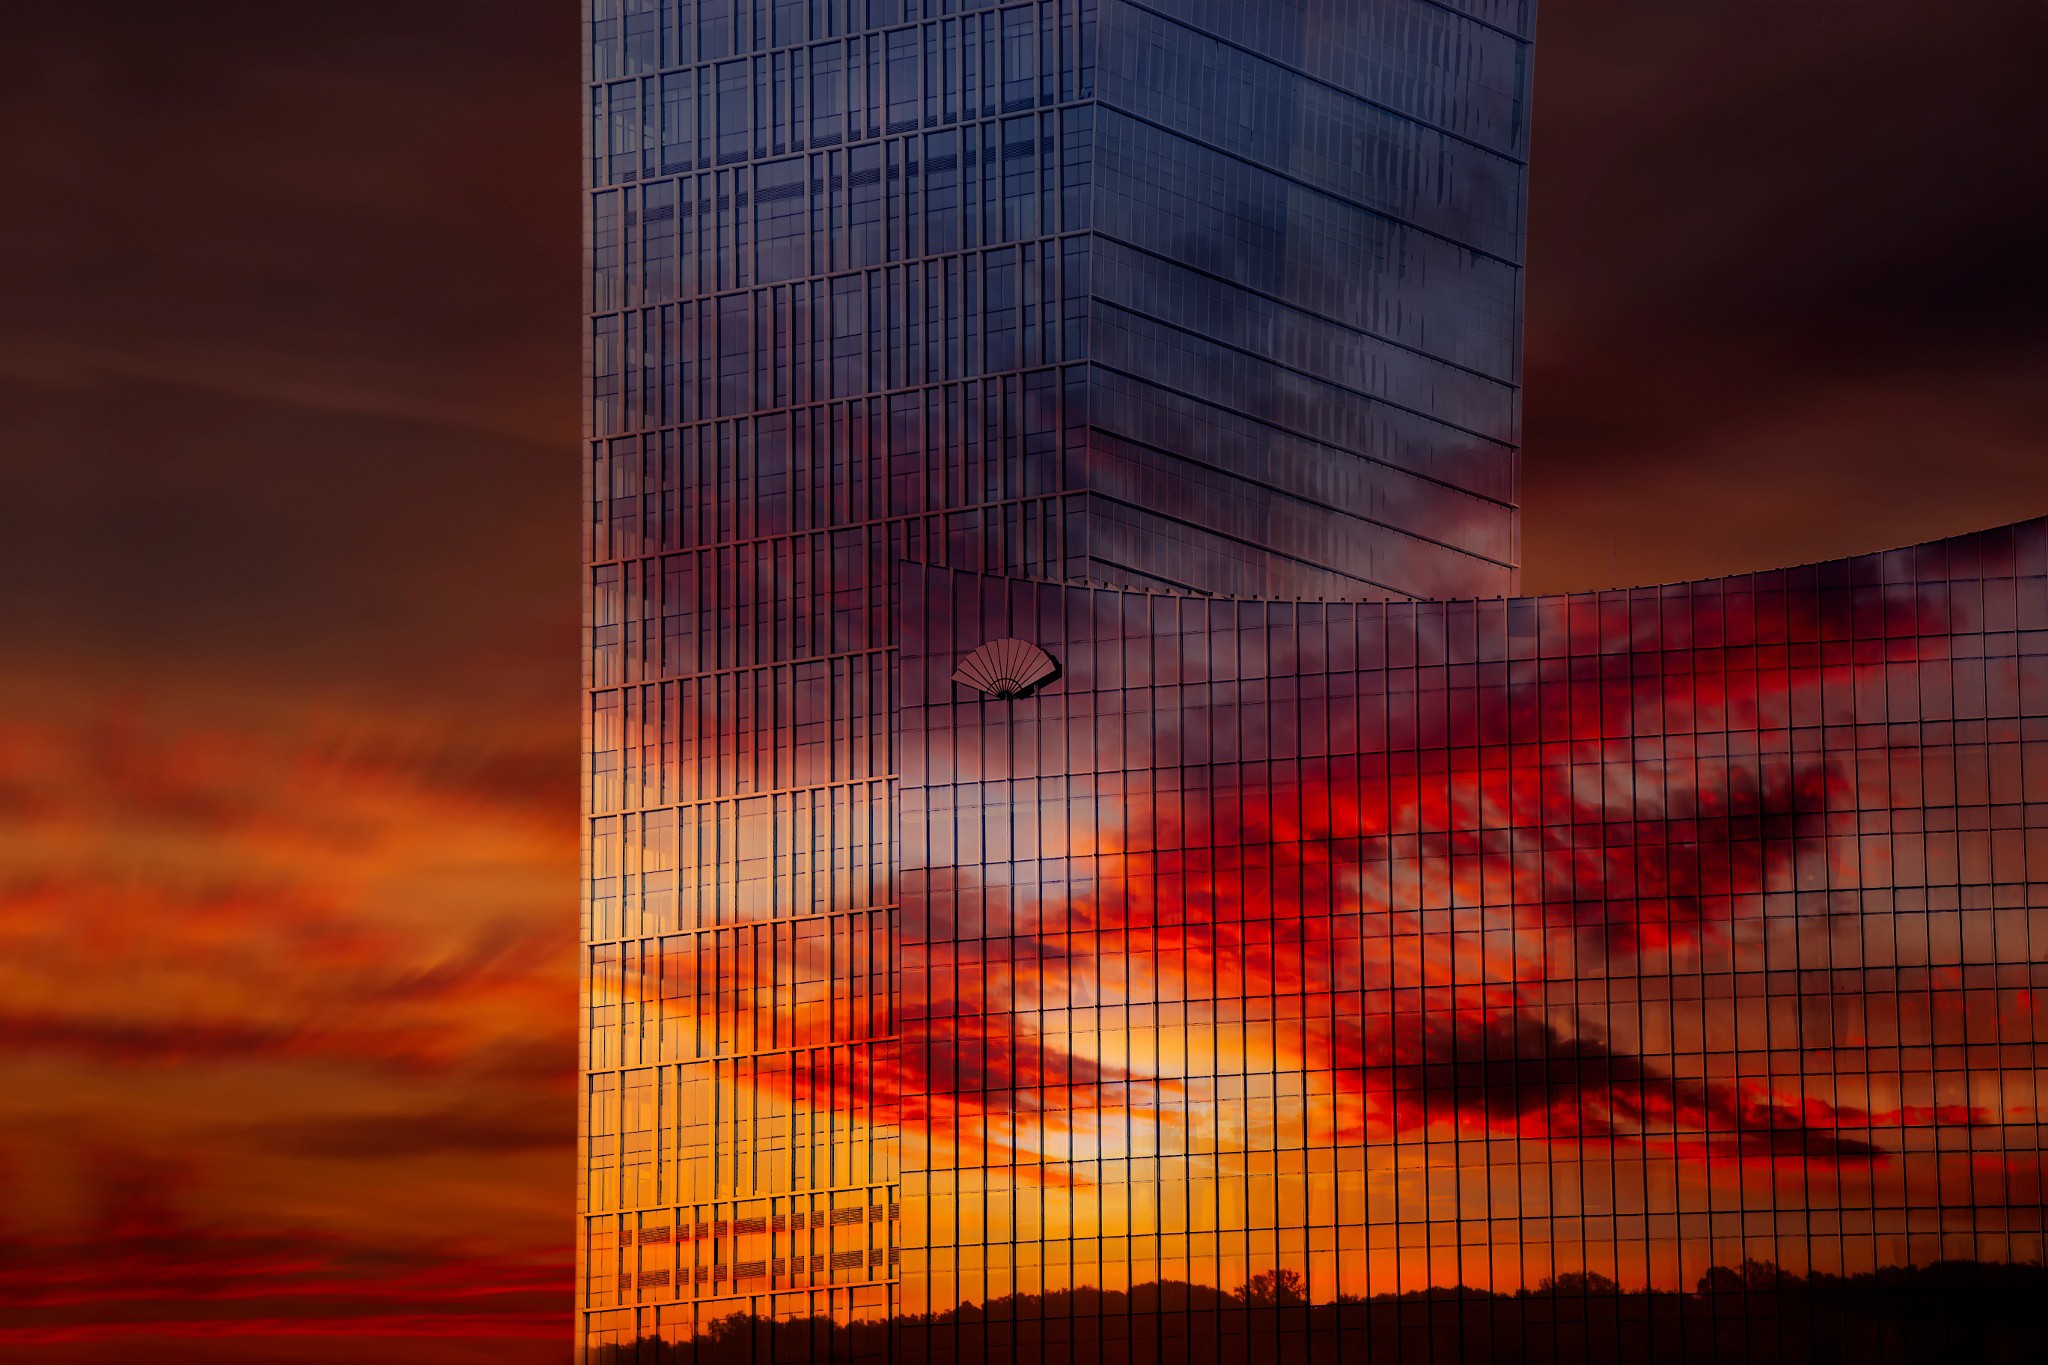 General 2048x1365 architecture building China skyscraper modern glass reflection sunset clouds long exposure window